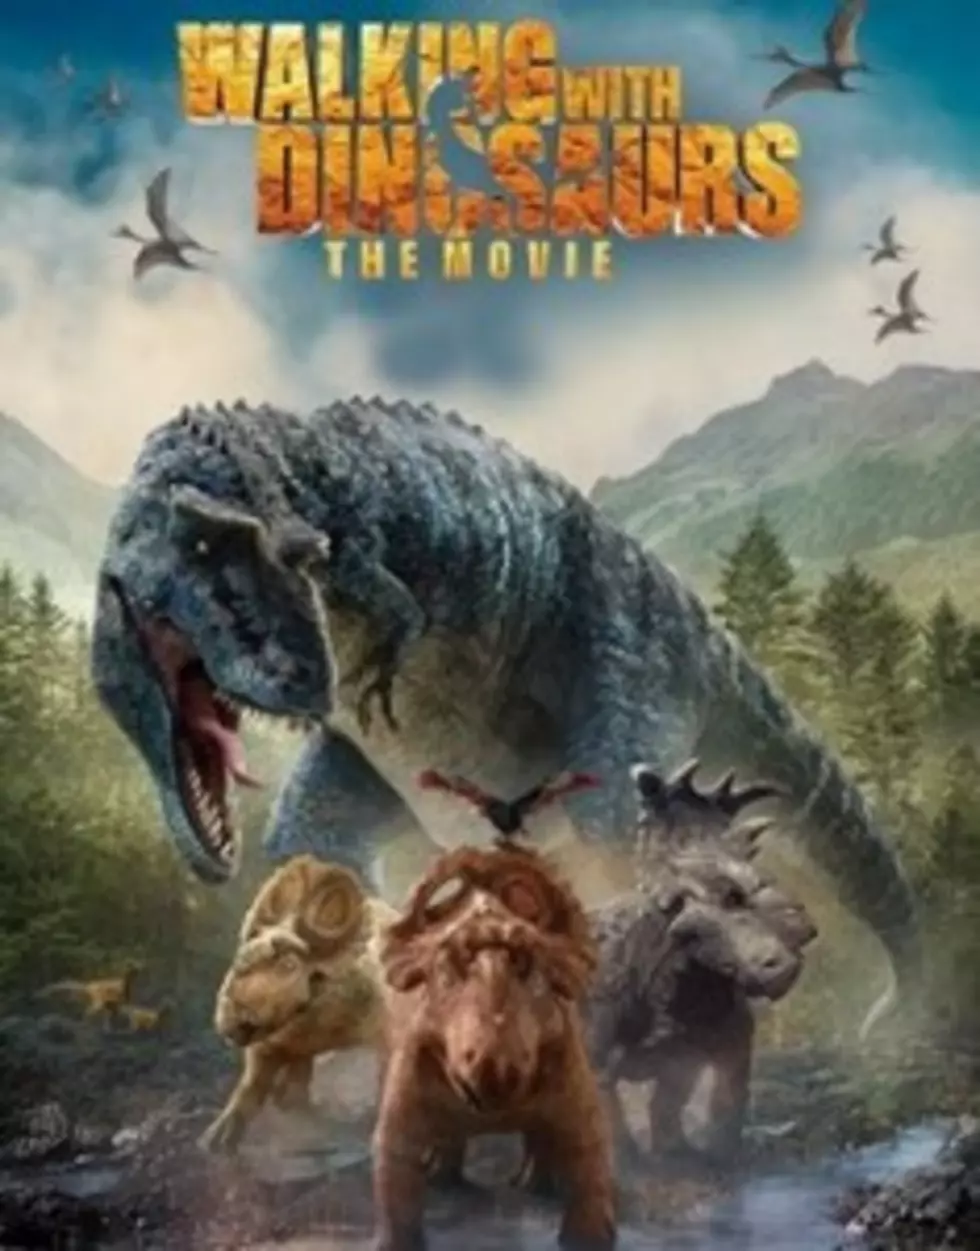 Go See The Movie &#8220;Walking With Dinosaurs&#8221; Today Through Thursday for $1